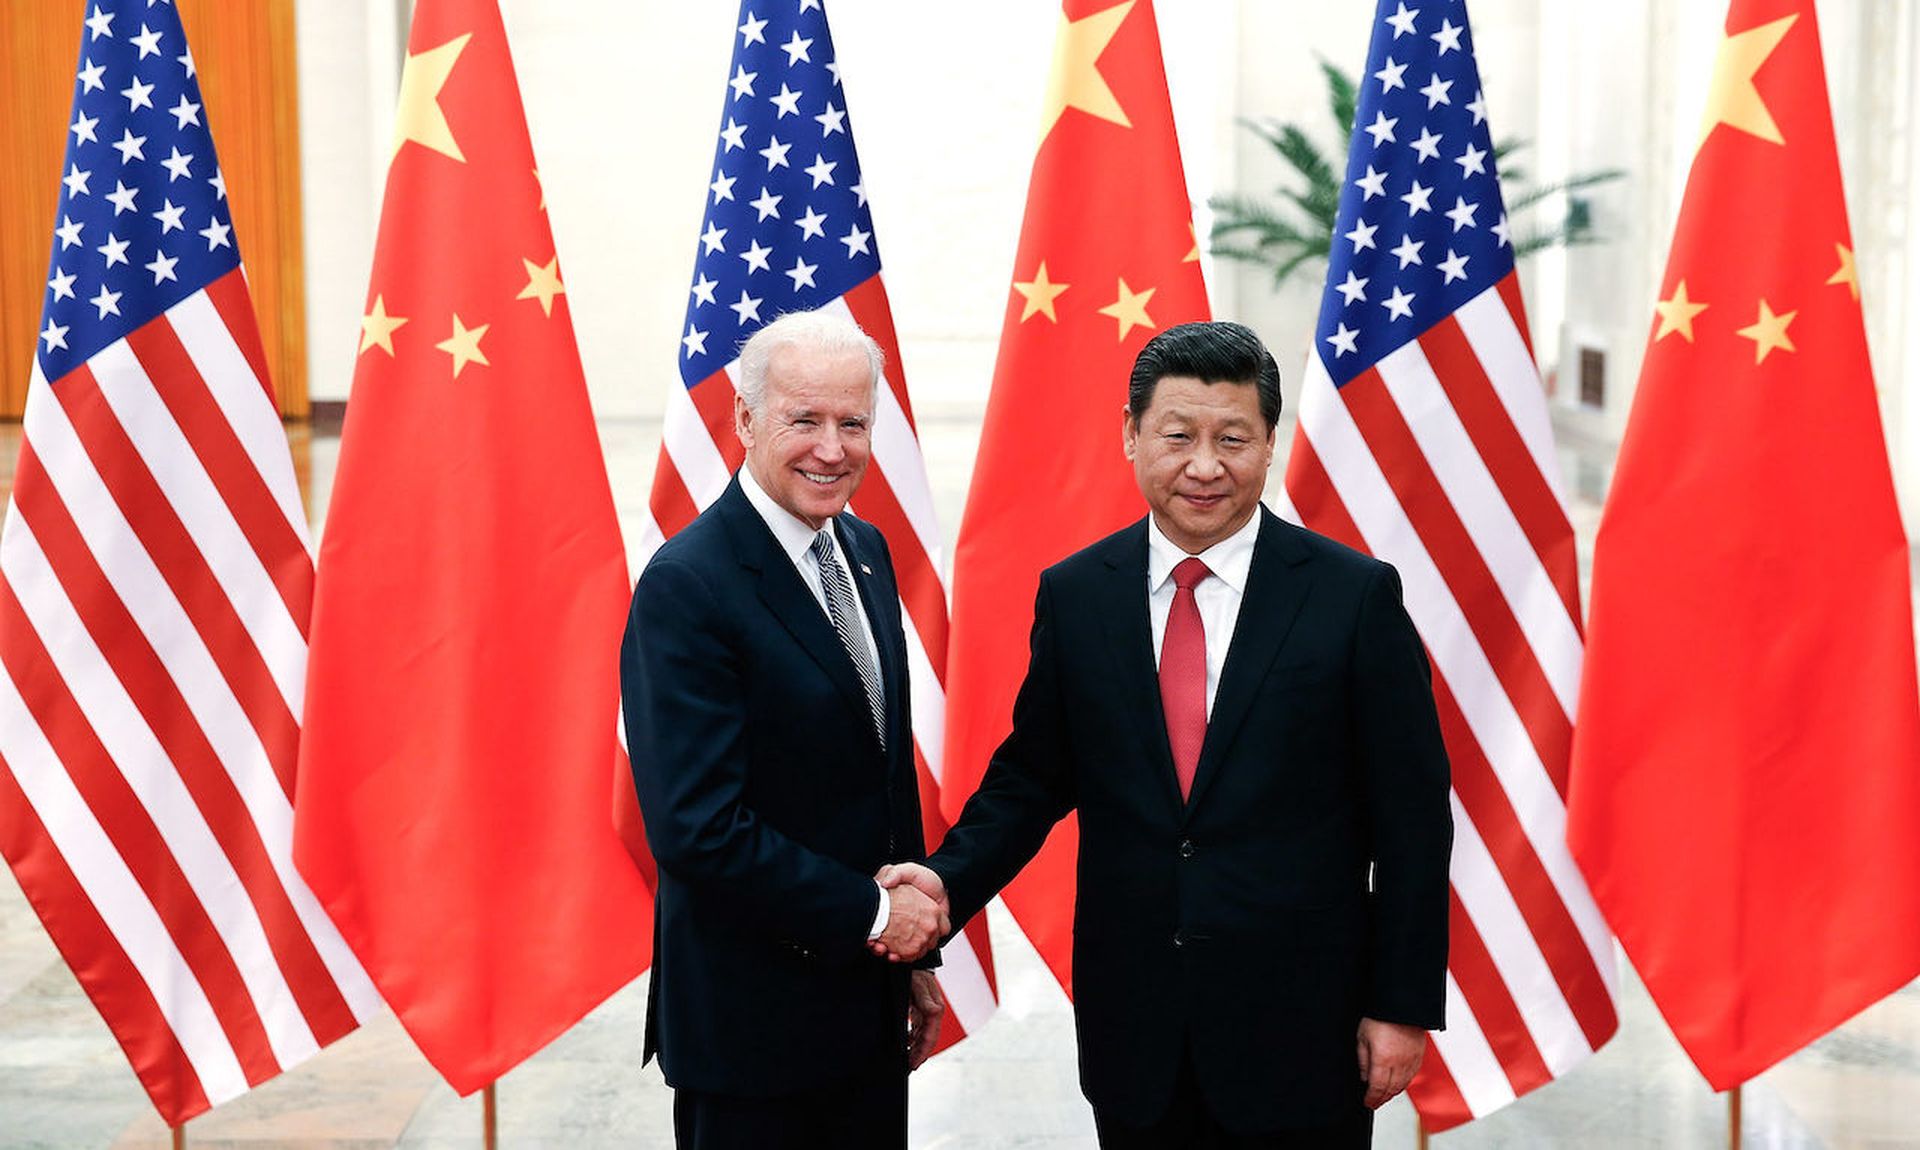 Chinese President Xi Jinping (R) shake hands with then U.S Vice President Joe Biden (L) inside the Great Hall of the People on December 4, 2013 in Beijing, China. Some question why the U.S. policies in response to cyberattacks out of China differ from those in response to Russia. (Photo by Lintao Zhang/Getty Images)